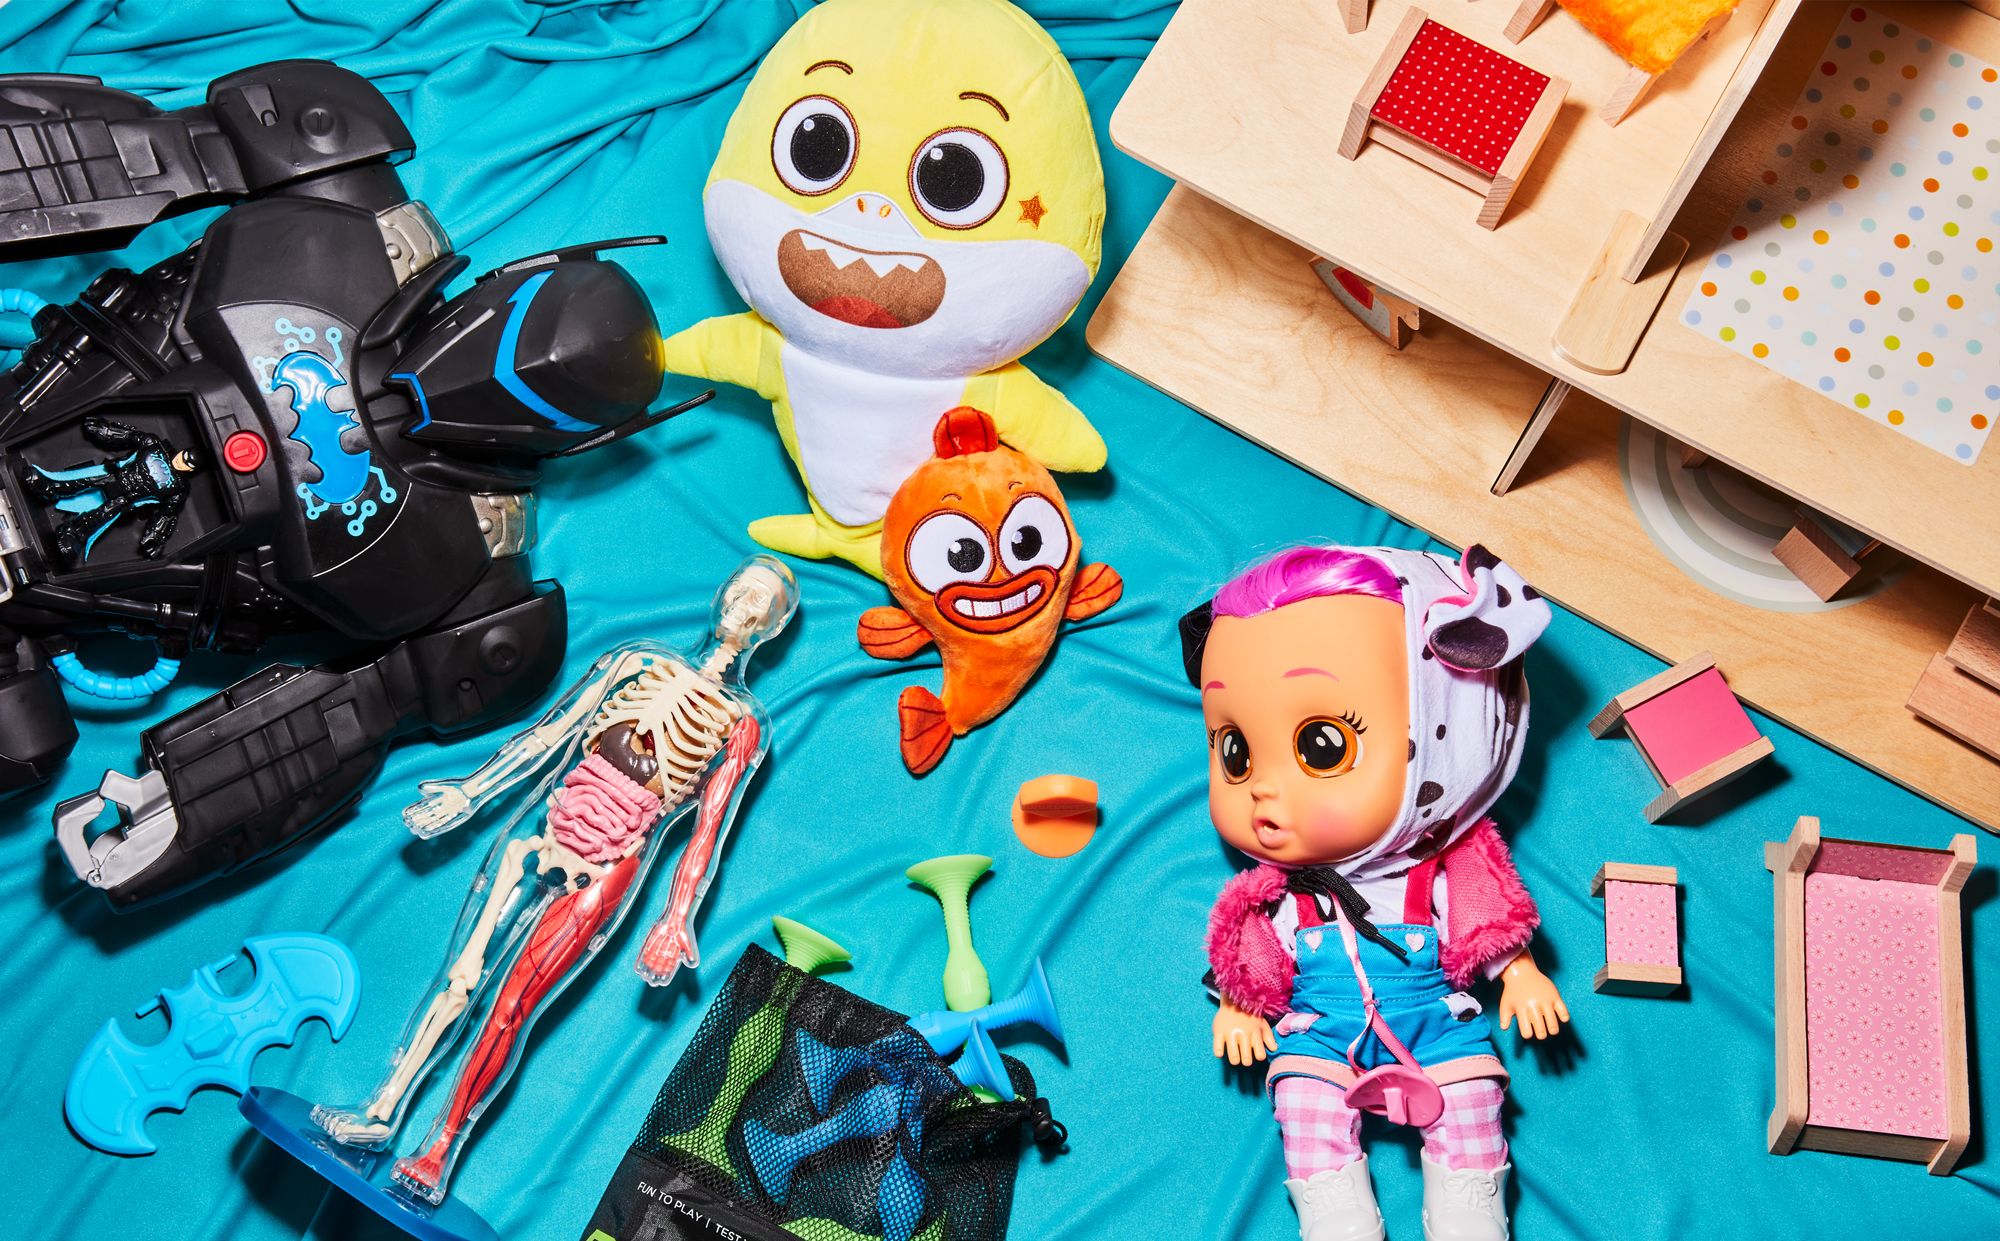 What Are The 20 Best Toys In The World?